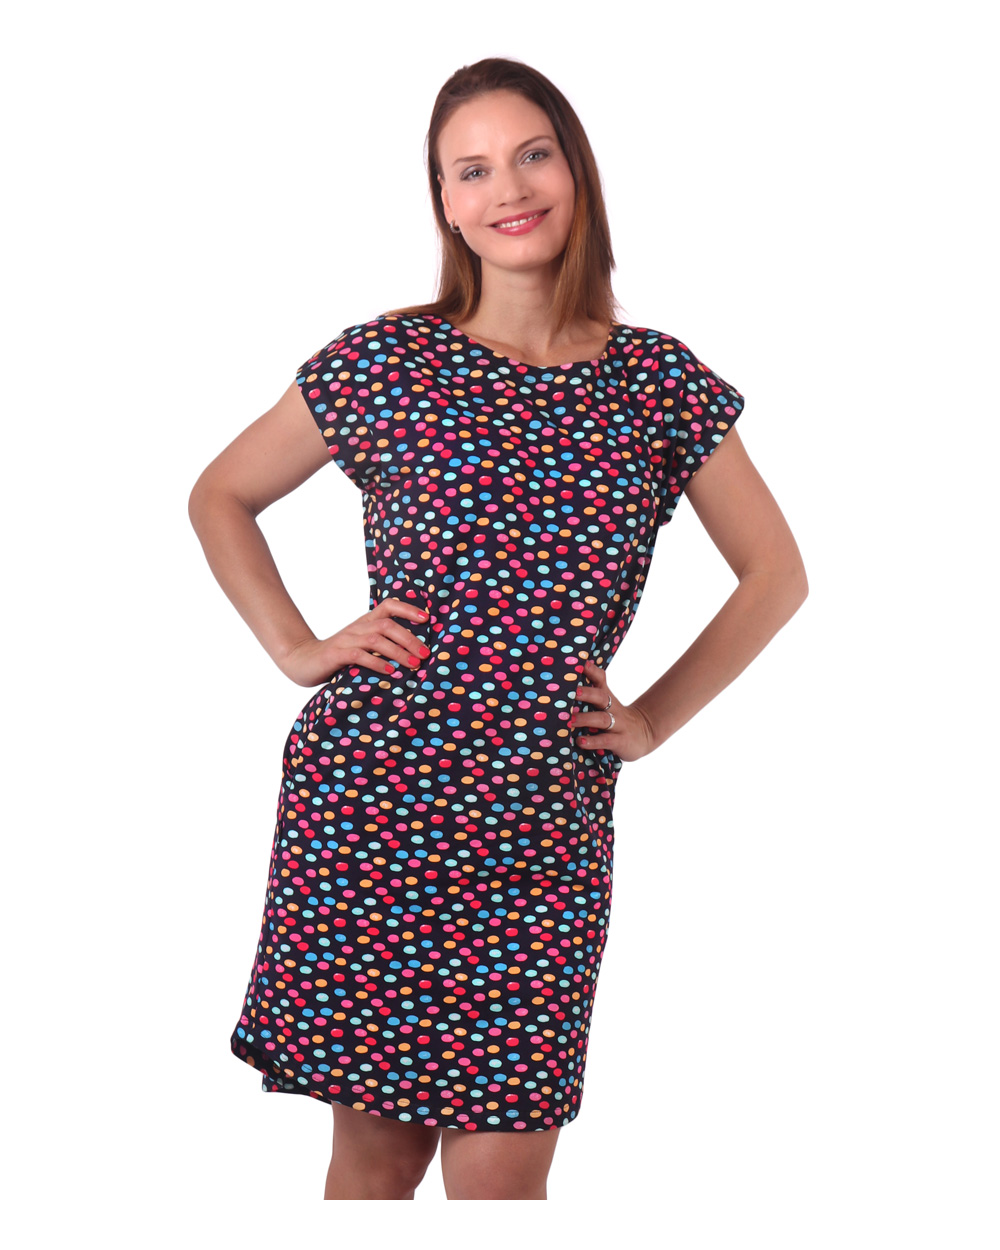 Women's dress with pockets Zoe, oversized loose fit, colored polka dots